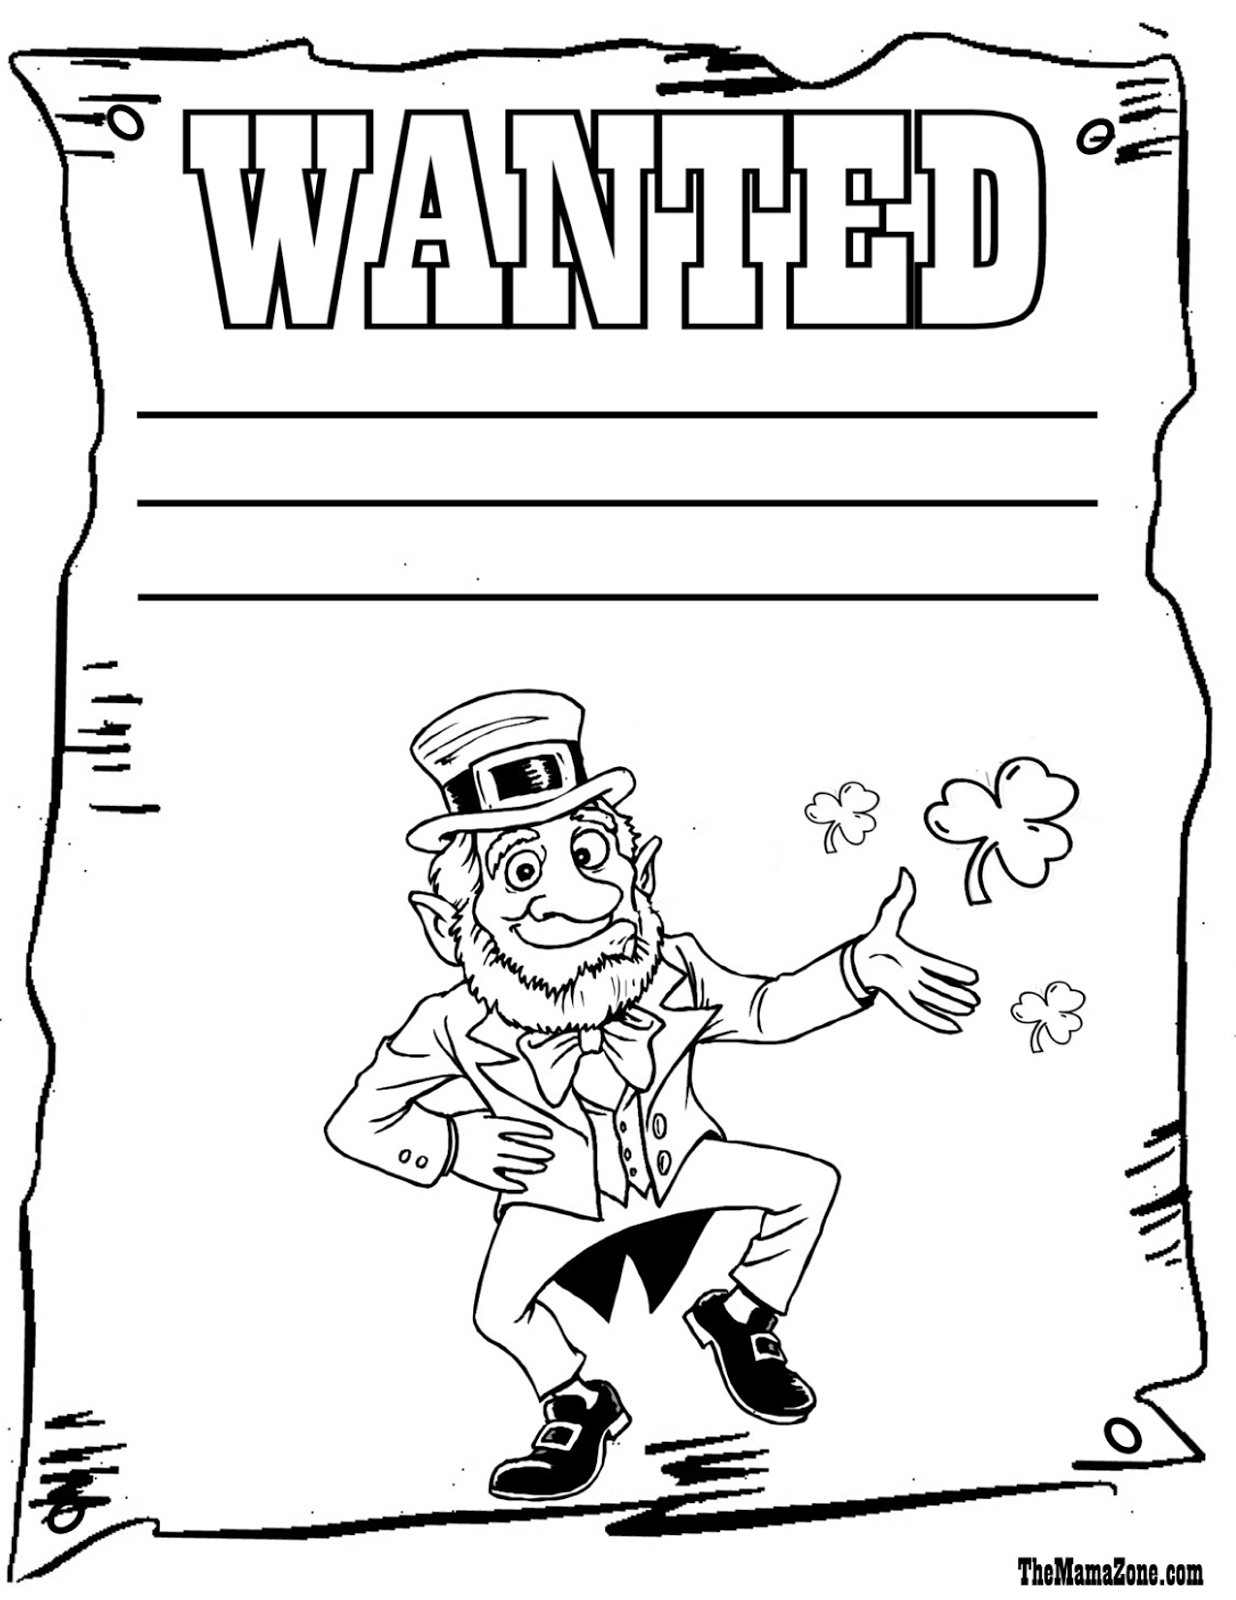 Cartoon Character St Patrick's Day Coloring Pages - Coloring Pages ...